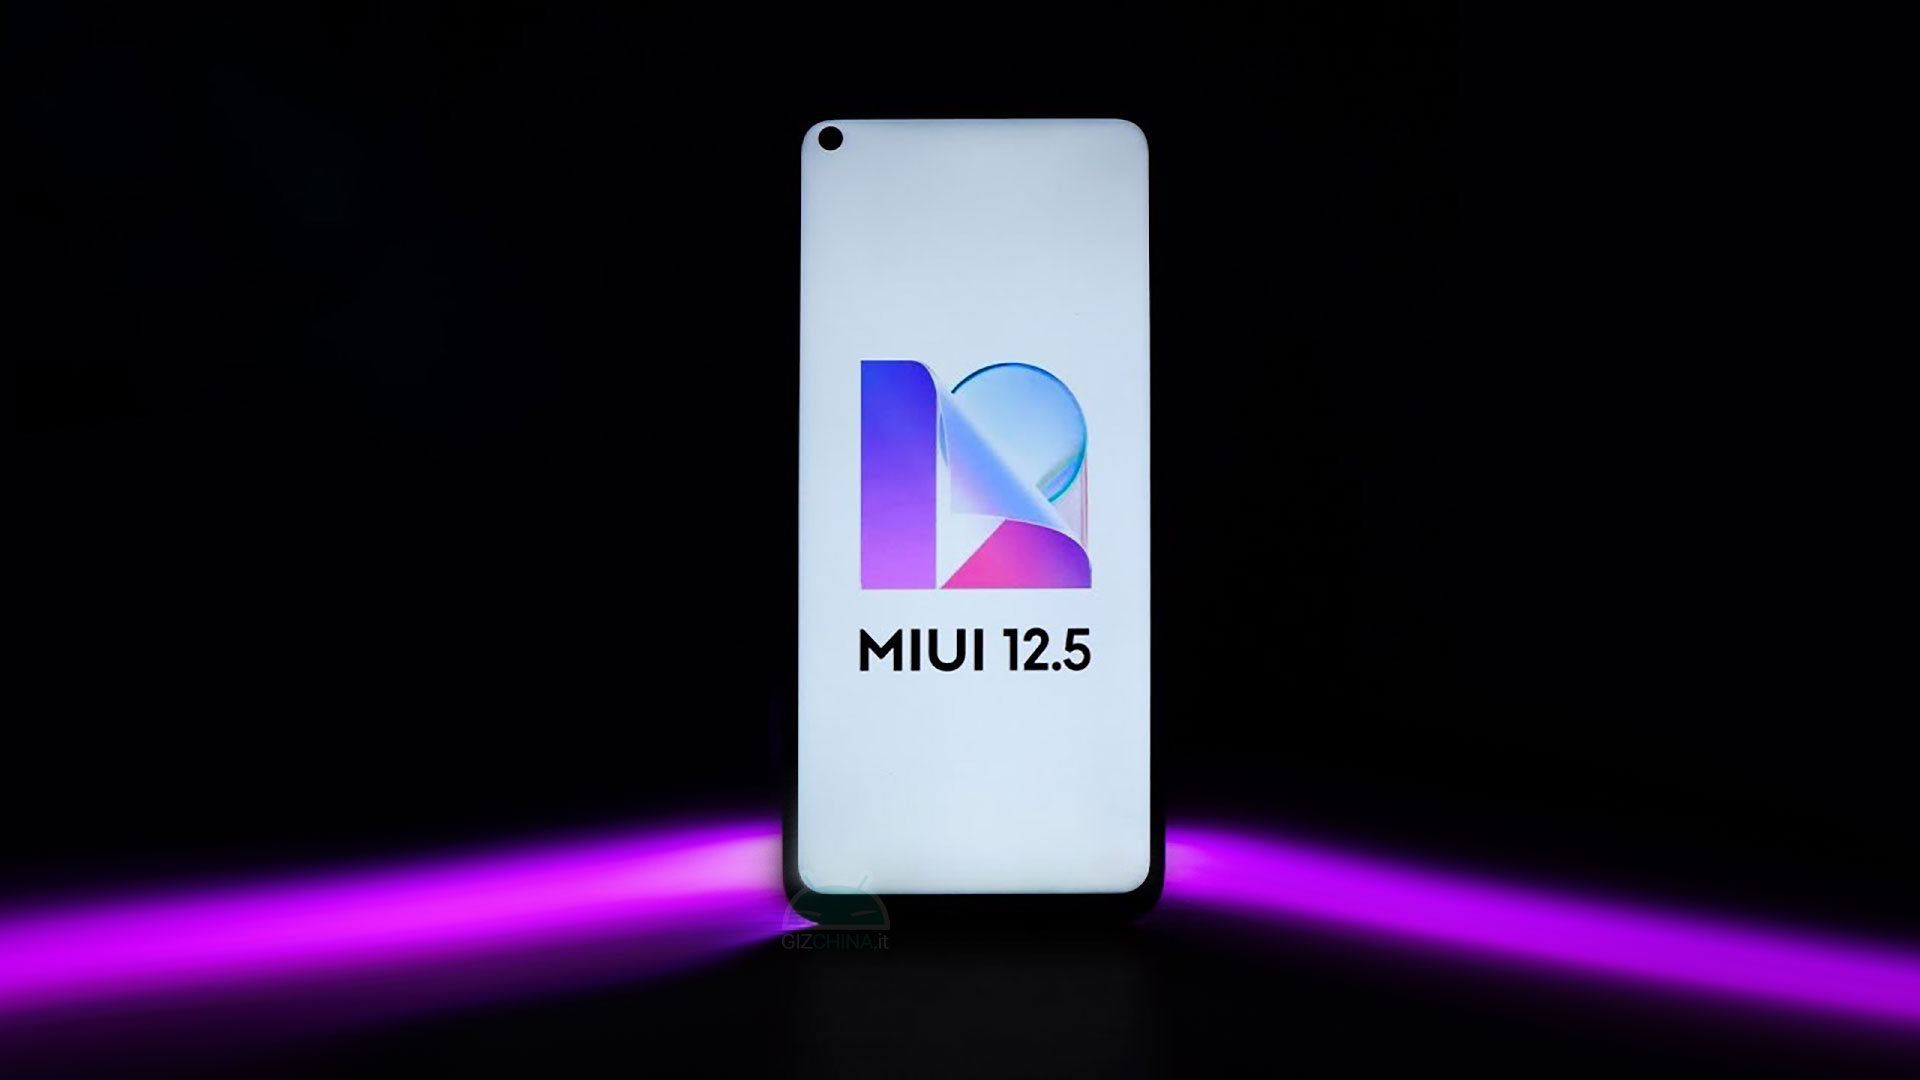 New stable MIUI 12.5 became available for 14 Xiaomi smartphones